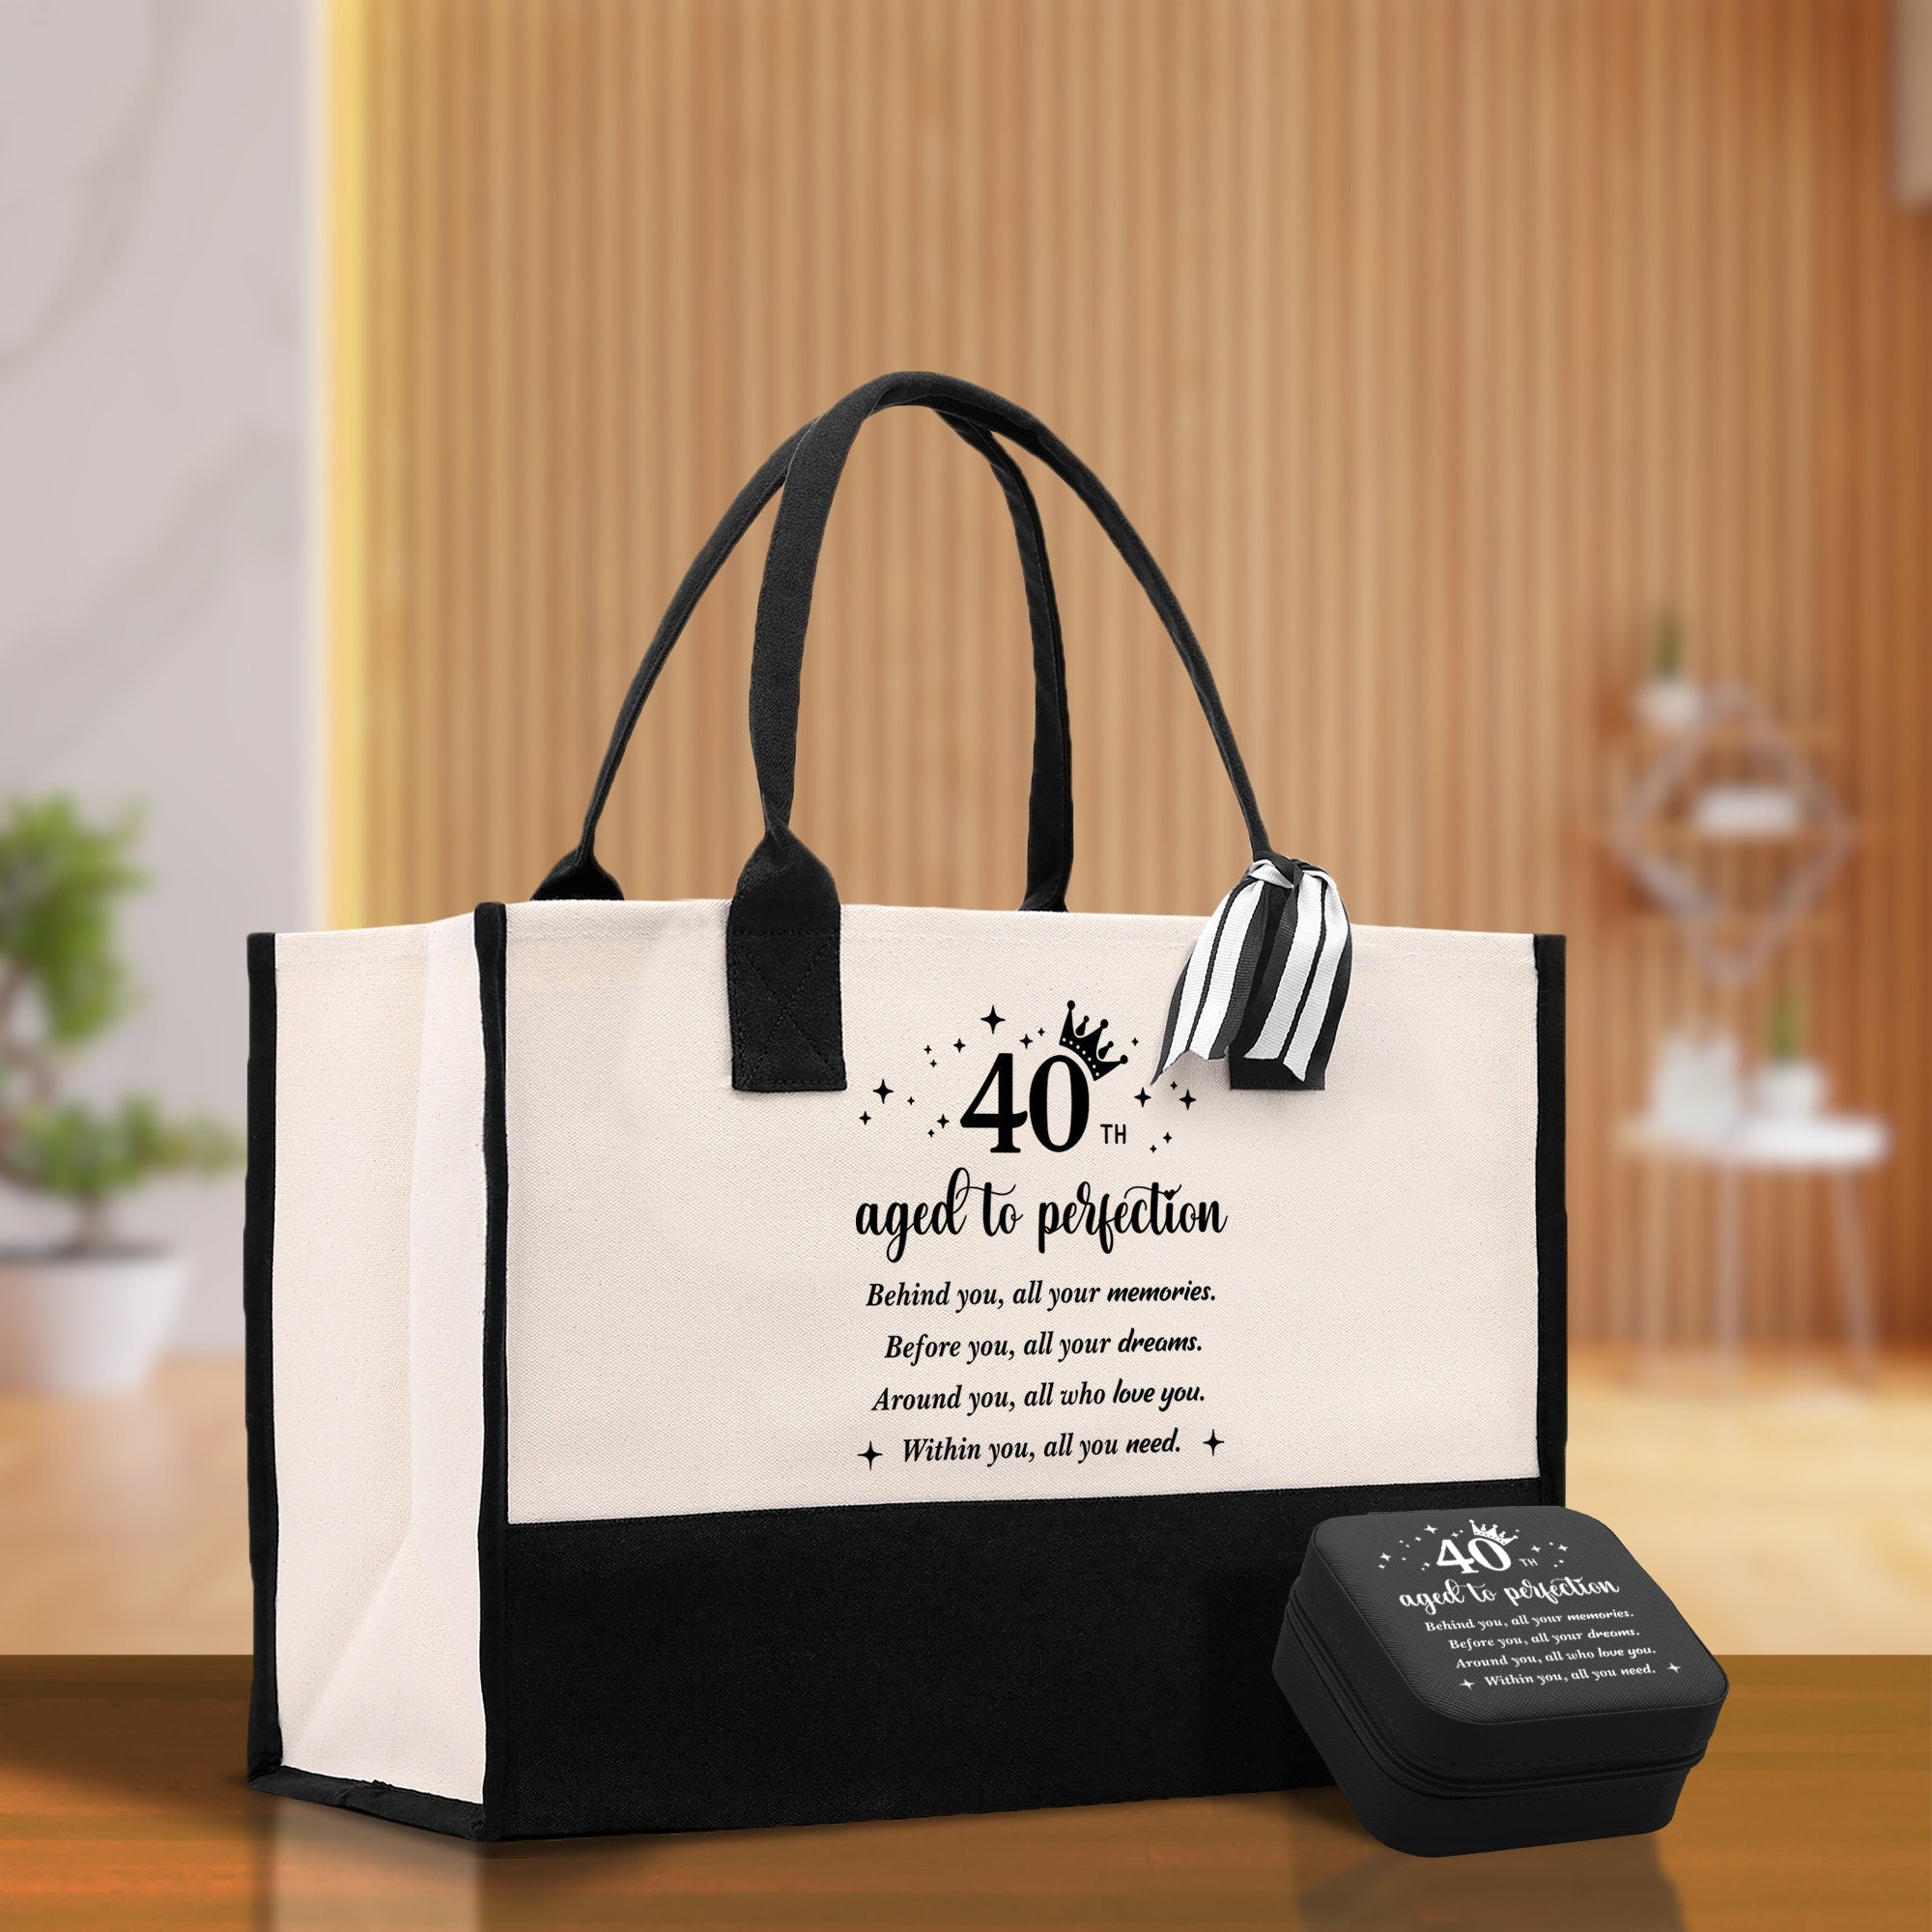 a black and white shopping bag with a quote on it